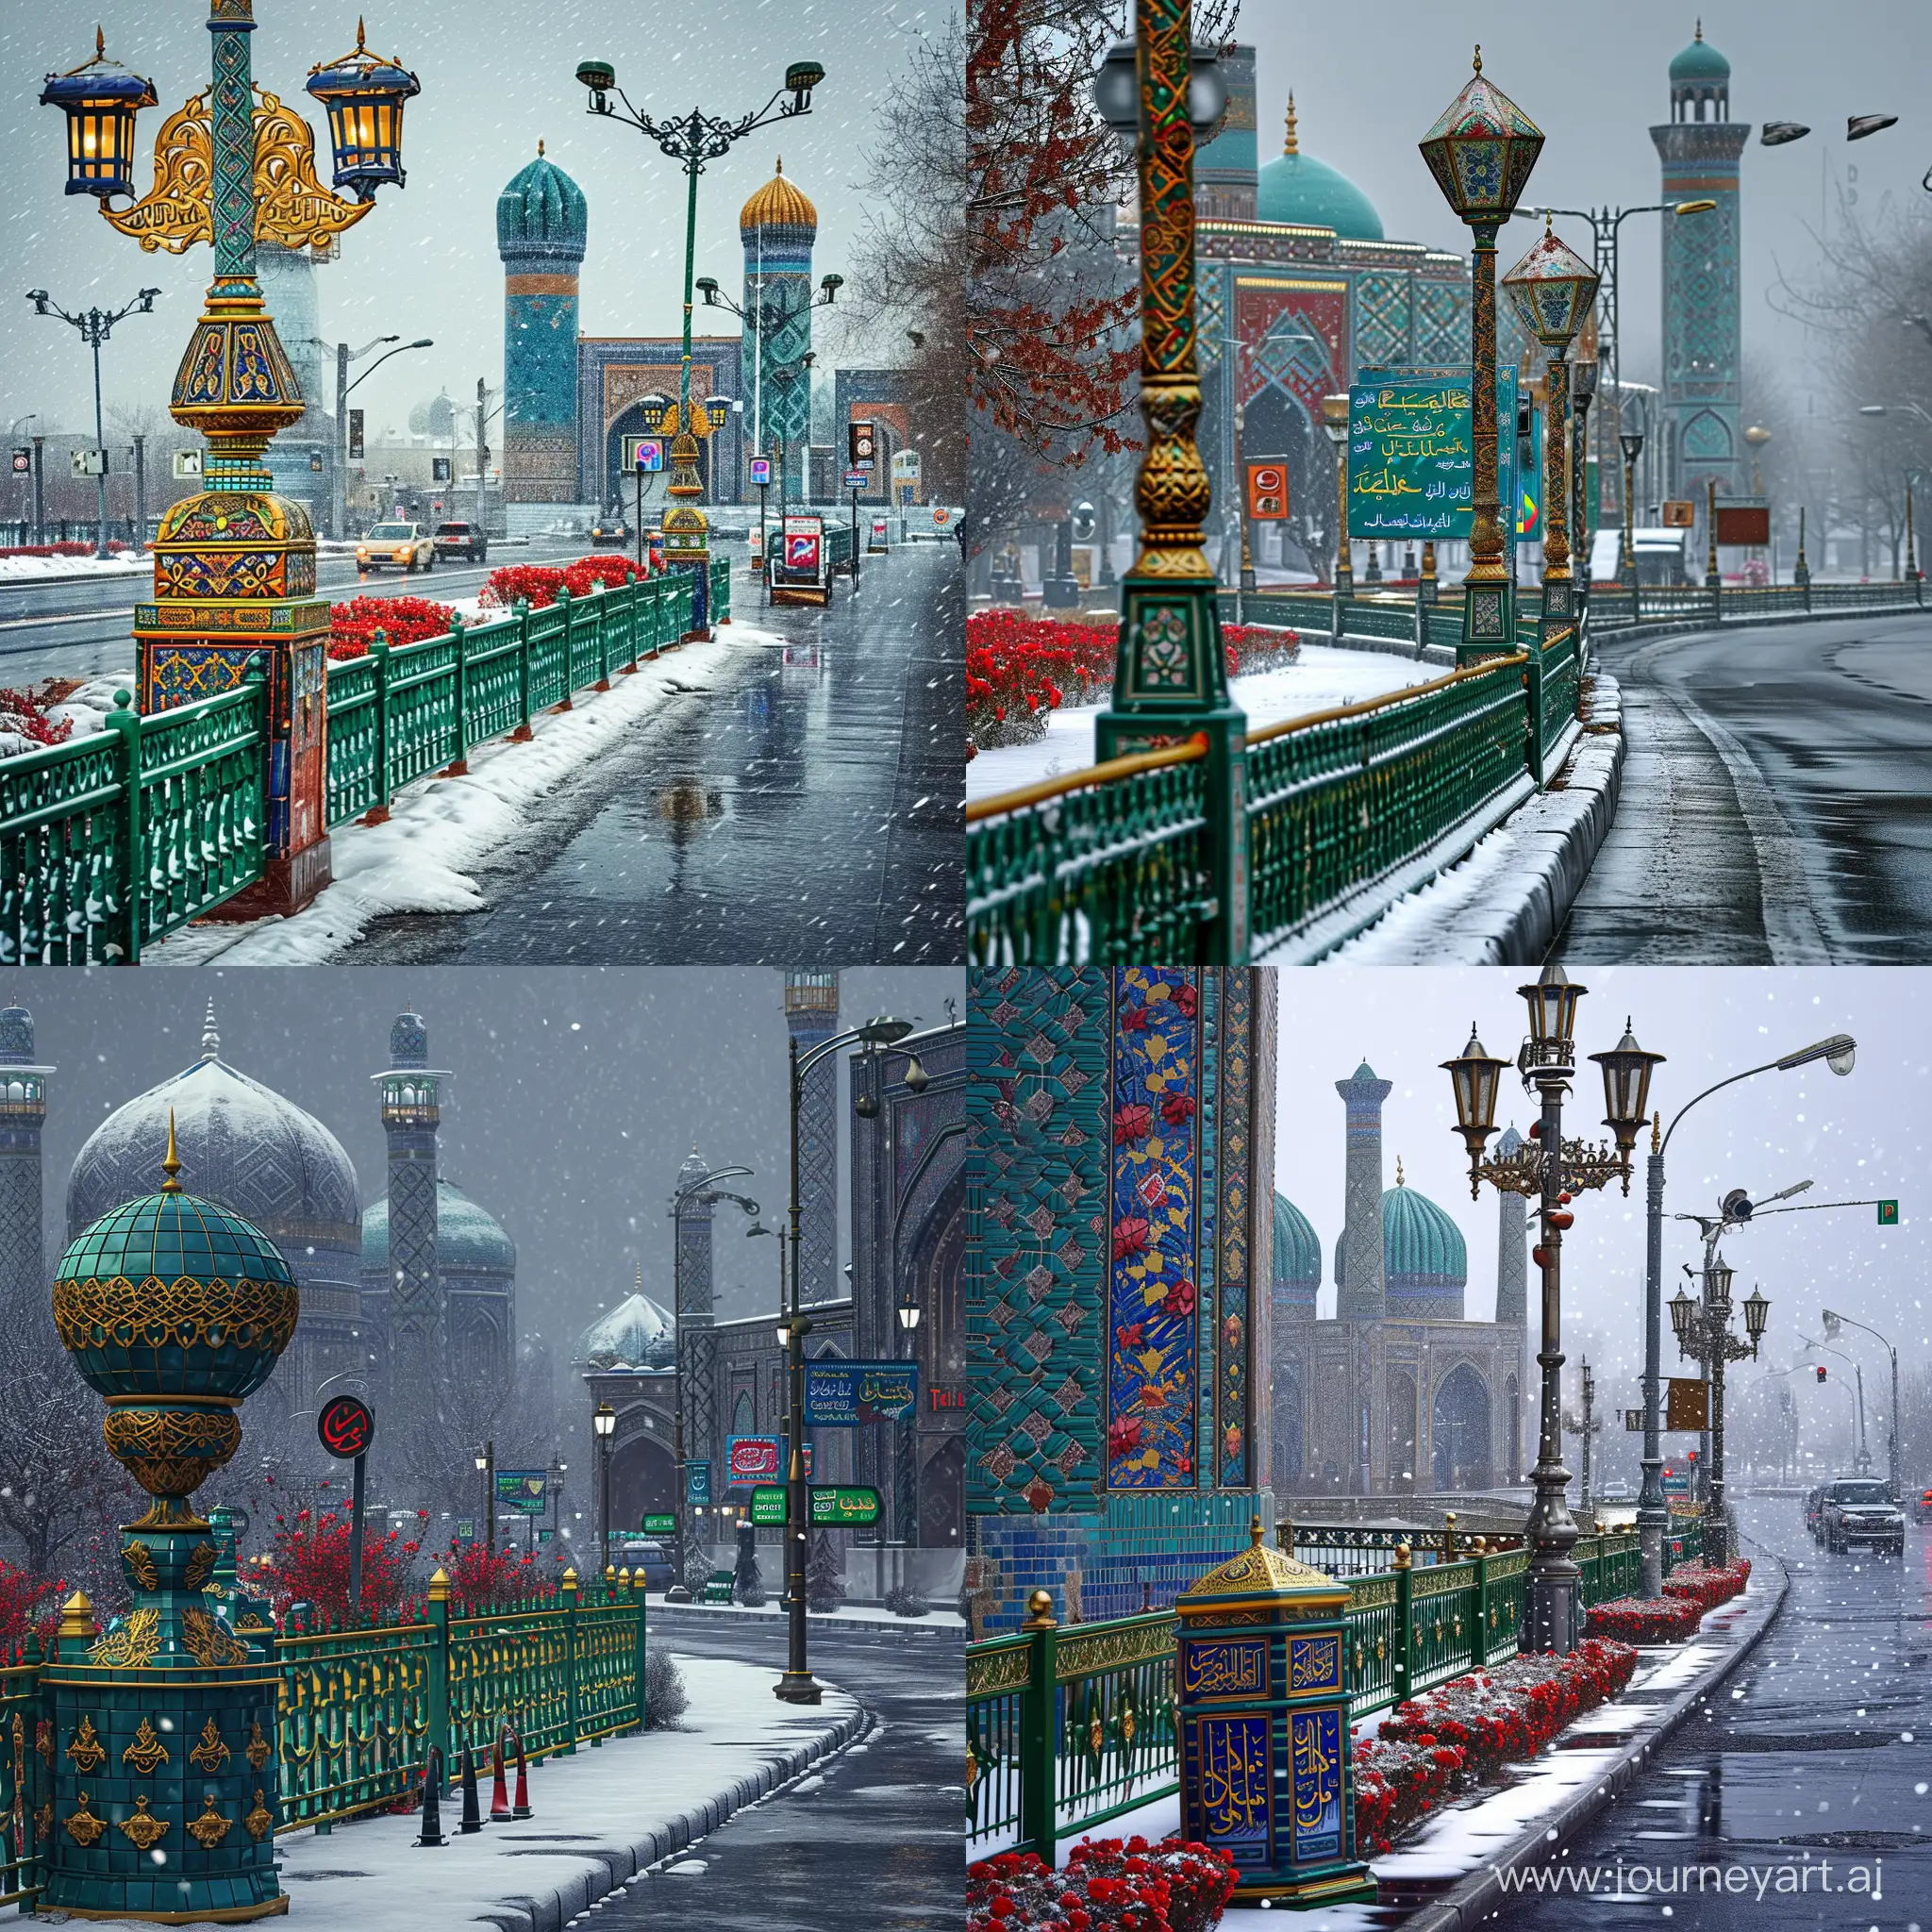 Snowy-Urban-City-Road-with-Ornate-Islamic-Architecture-and-Traffic-Signs